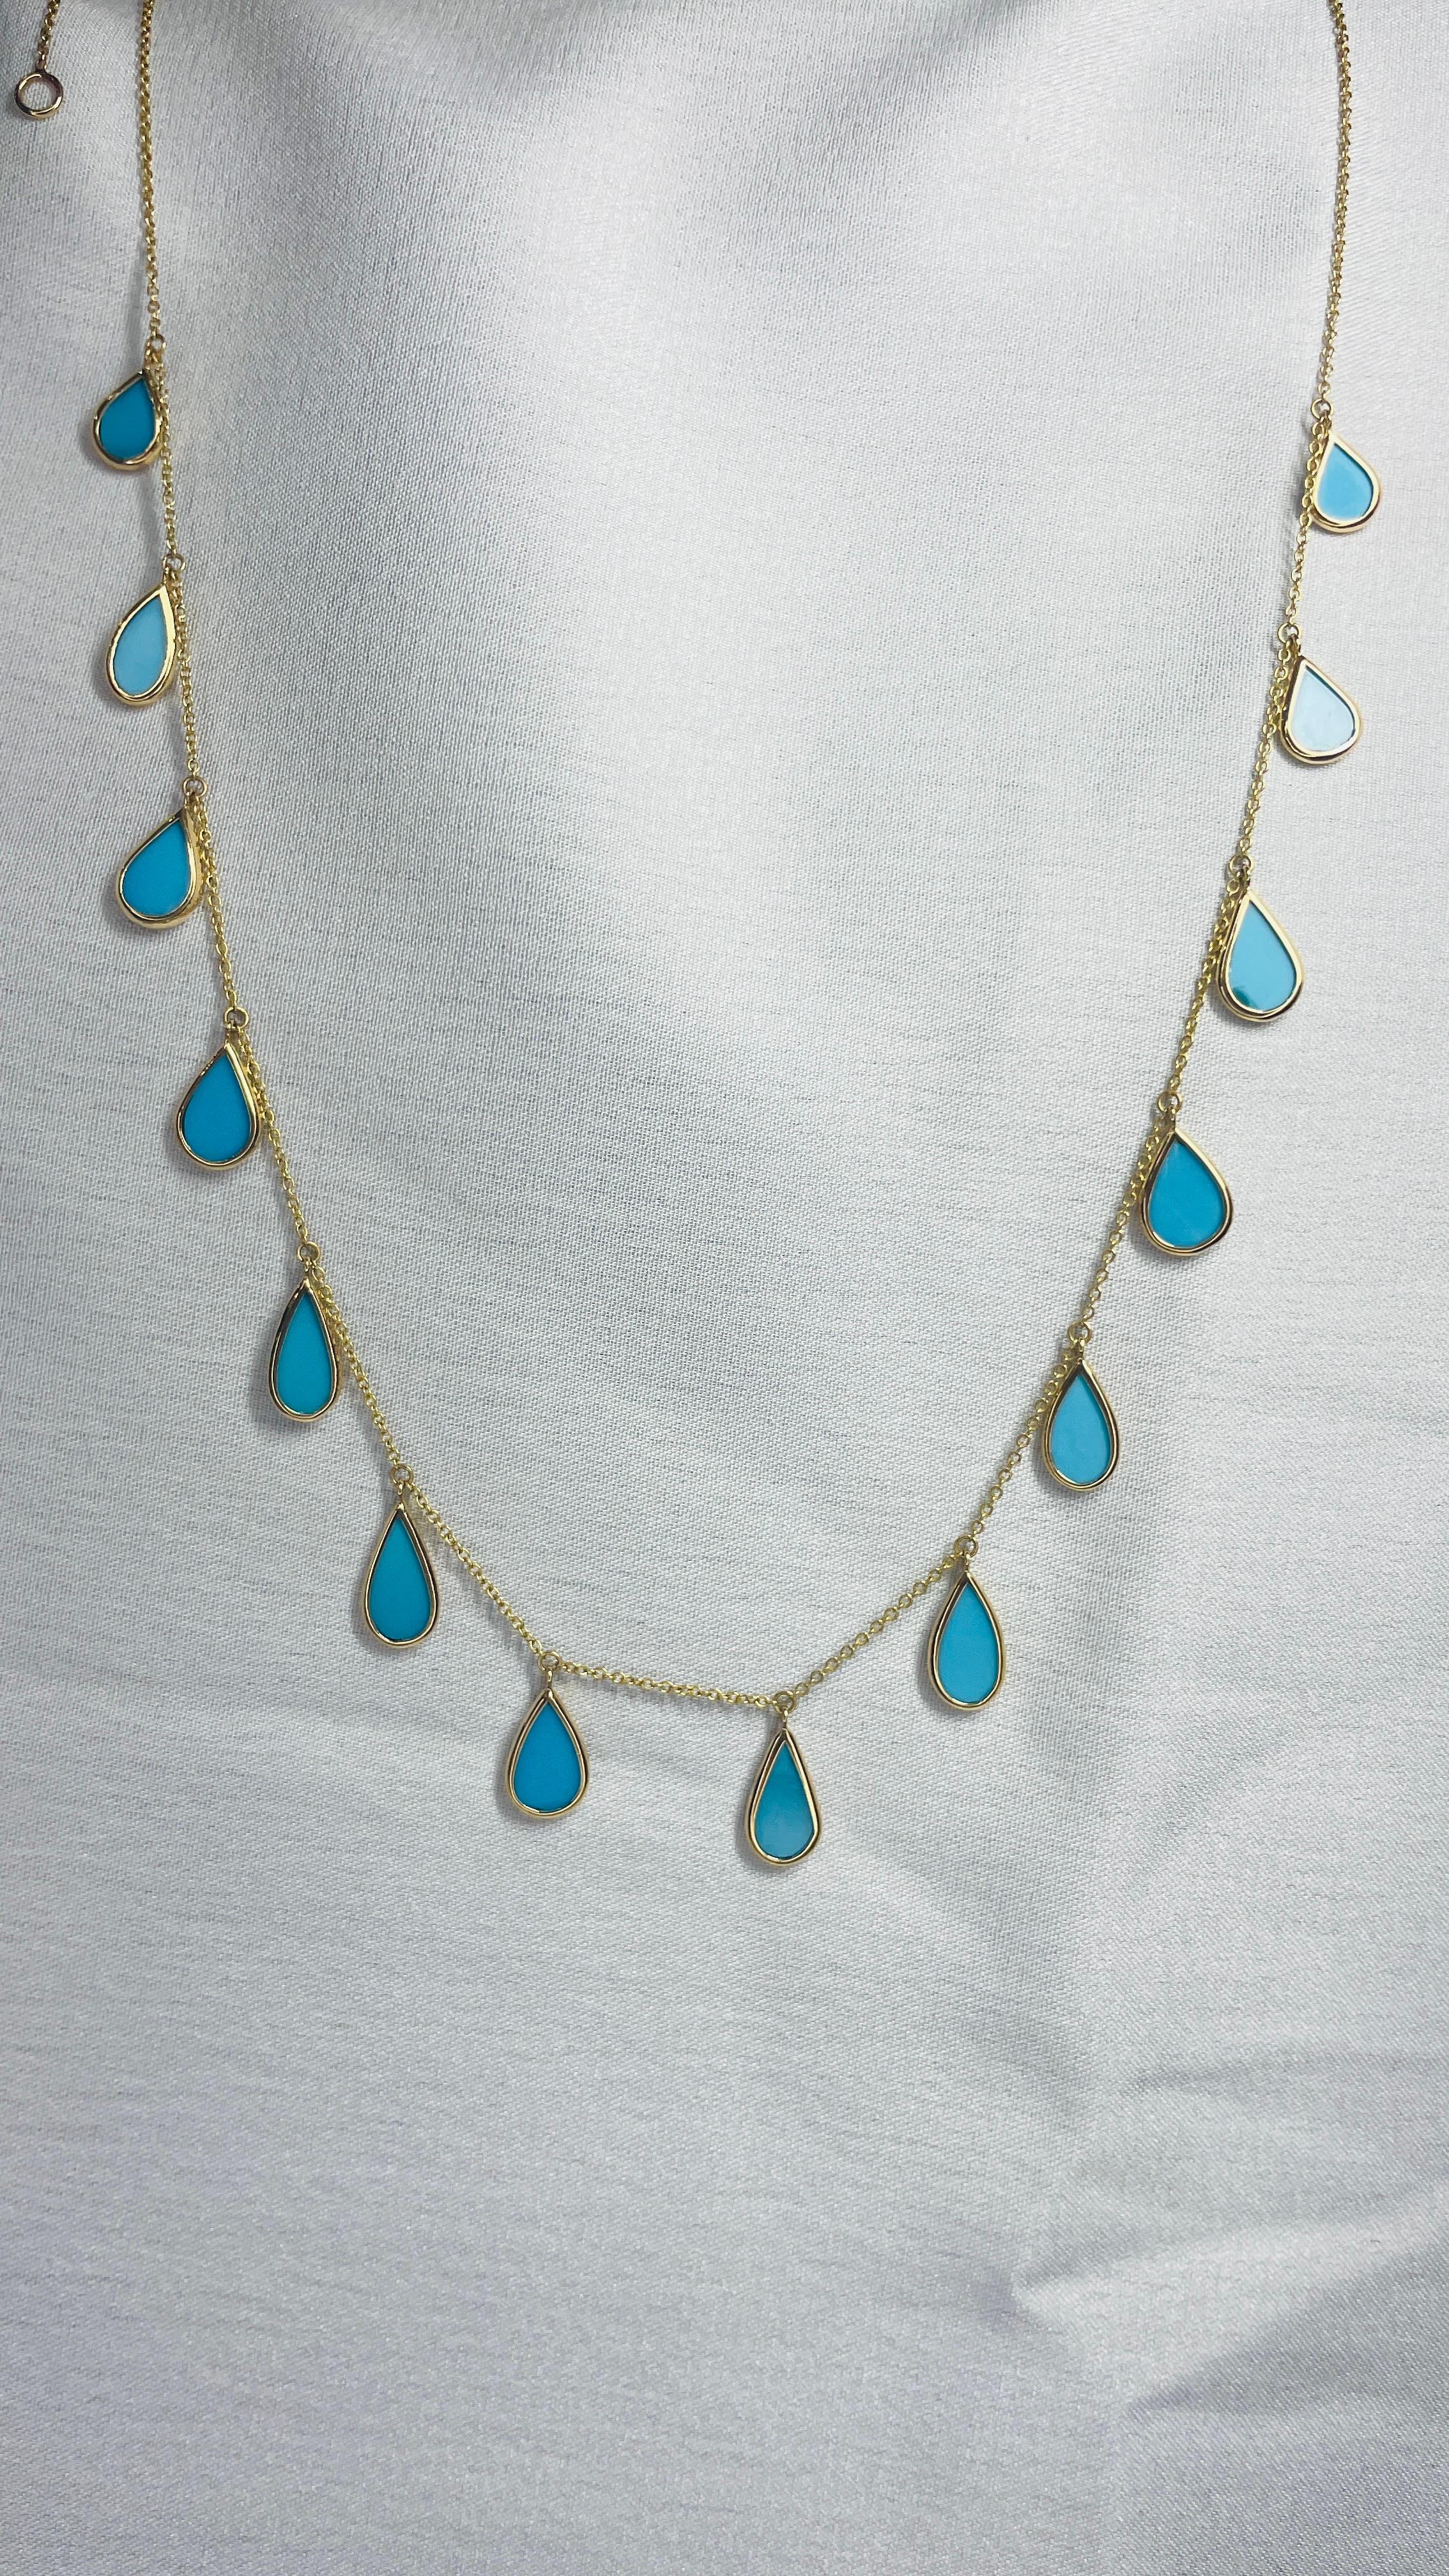 Turquoise Necklace in 18K Gold studded with pear cut diamonds.
Accessorize your look with this elegant turquoise drop necklace. This stunning piece of jewelry instantly elevates a casual look or dressy outfit. Comfortable and easy to wear, it is